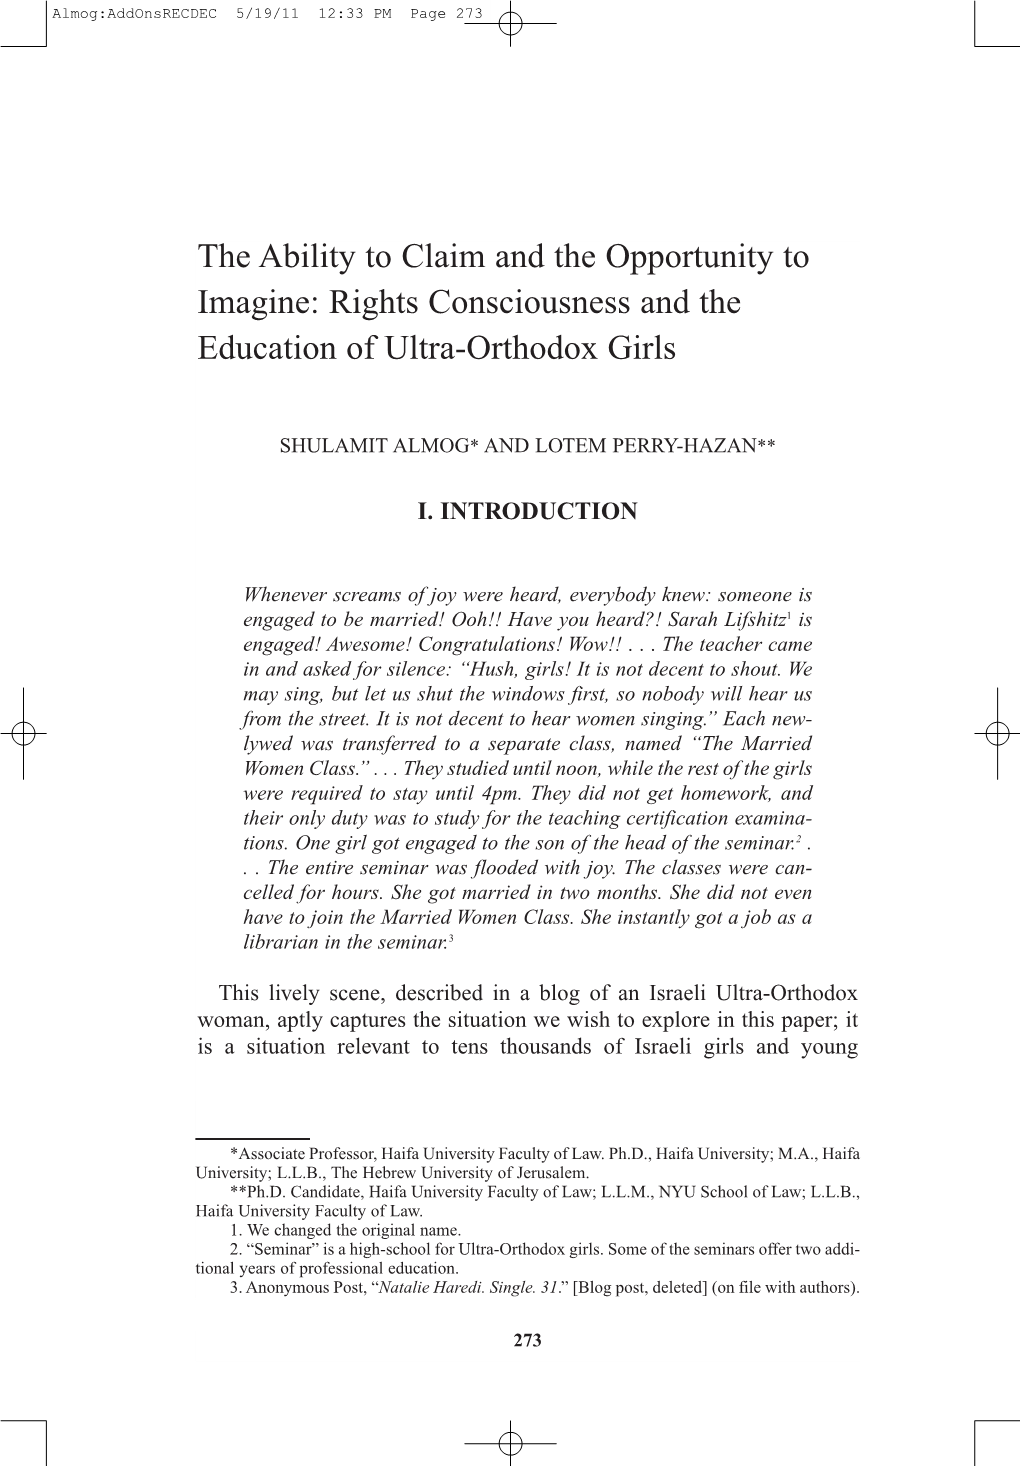 The Ability to Claim and the Opportunity to Imagine: Rights Consciousness and the Education of Ultra-Orthodox Girls